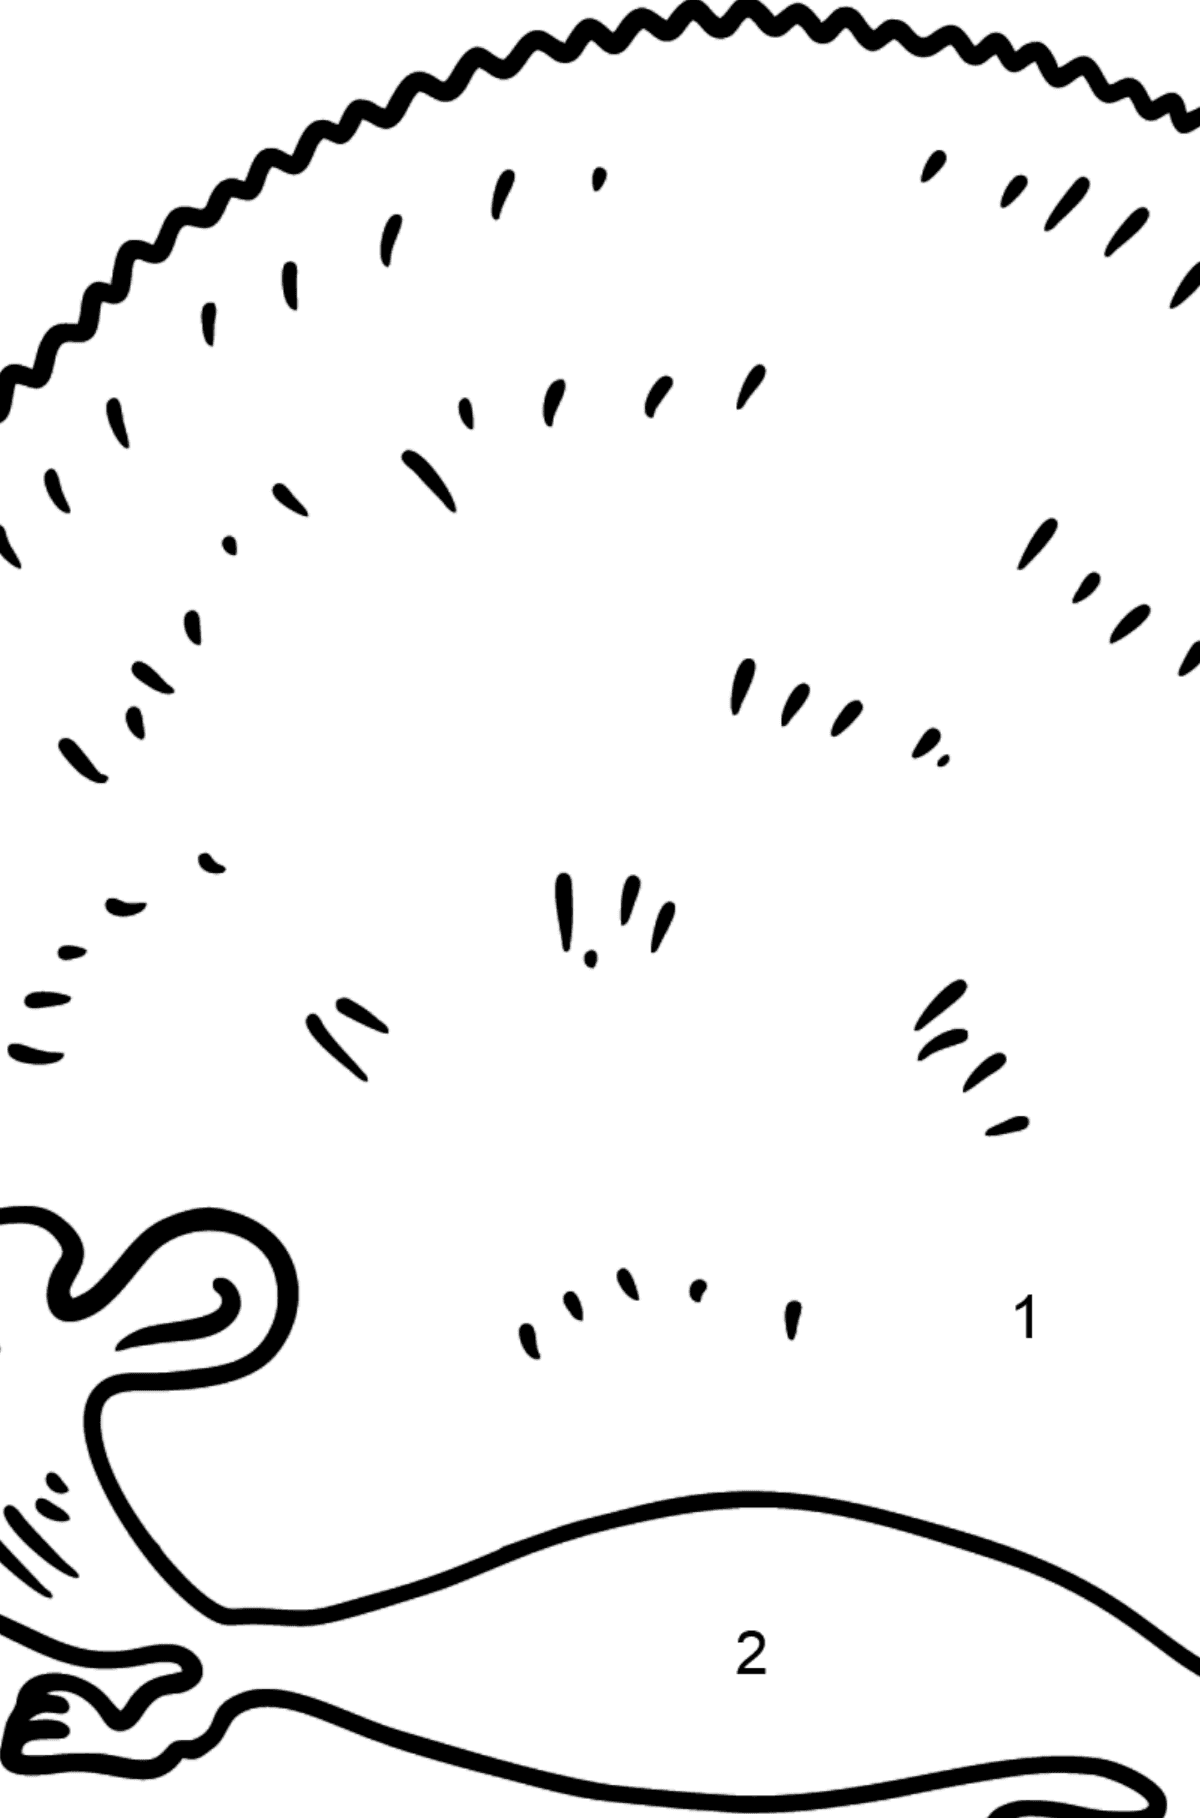 Hedgehog coloring page - Coloring by Numbers for Kids